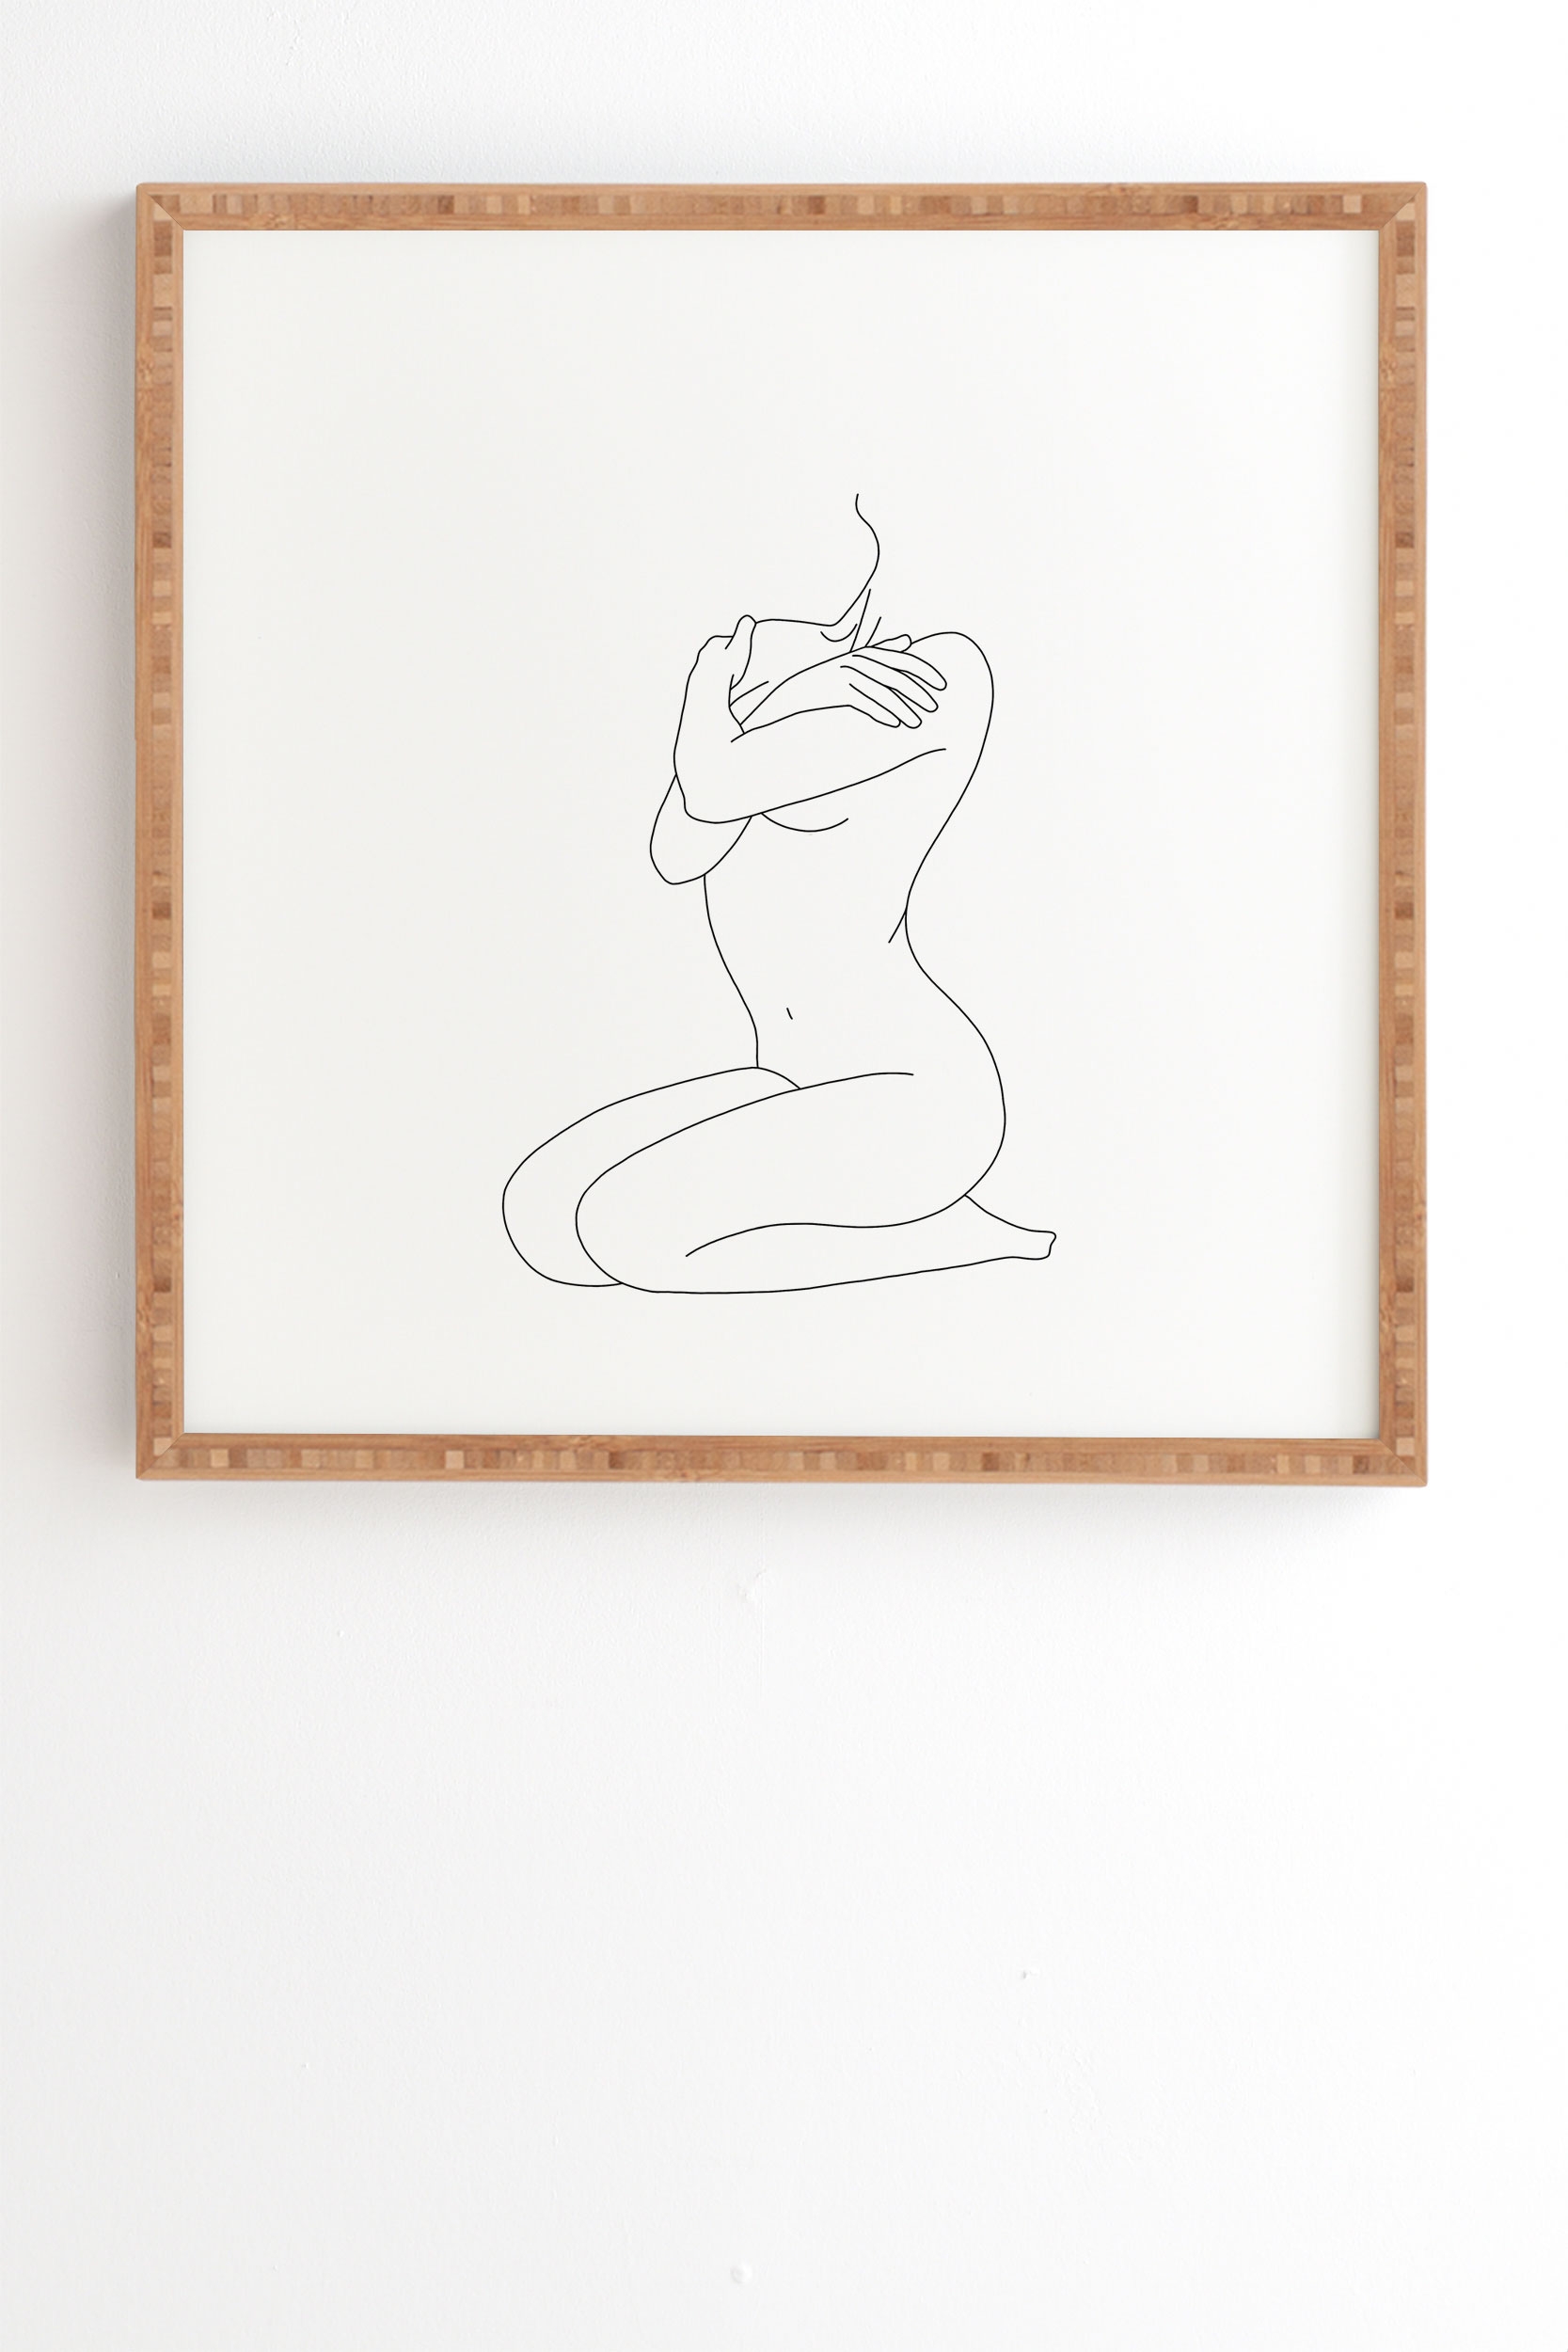 Life Drawing Illustration by The Colour Study - Framed Wall Art Bamboo 19" x 22.4" - Image 1